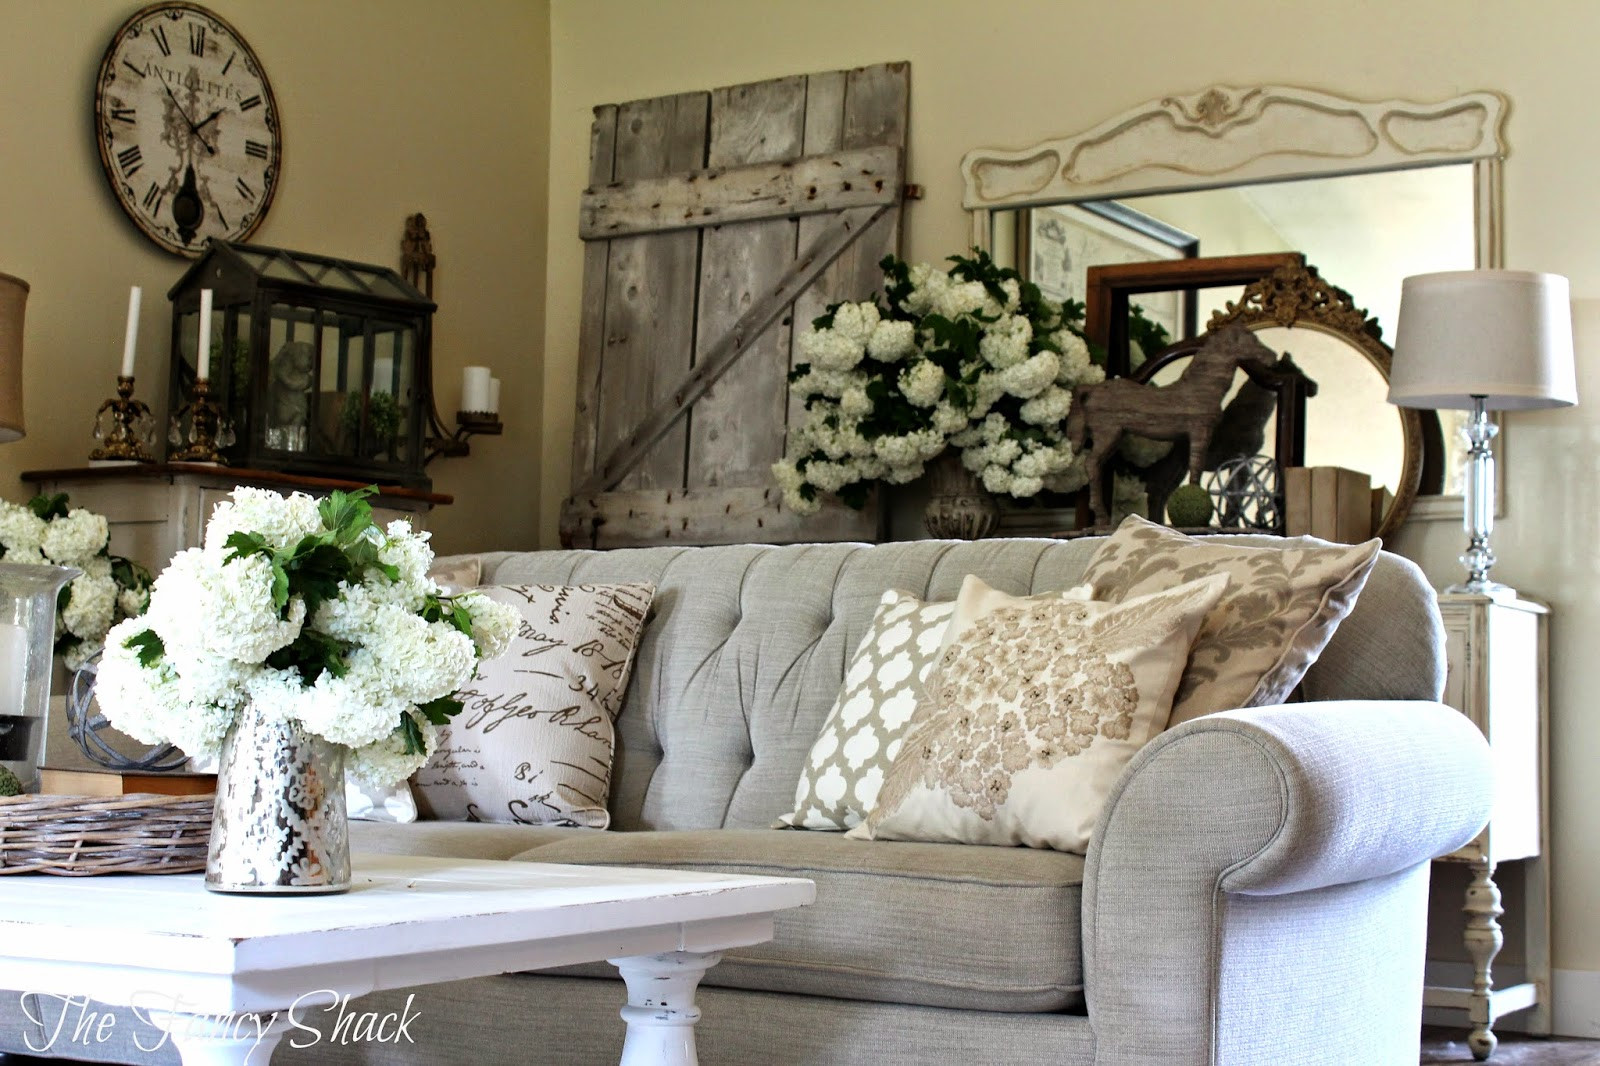 Rustic Chic Living Room
 The Fancy Shack New Living Room Furniture